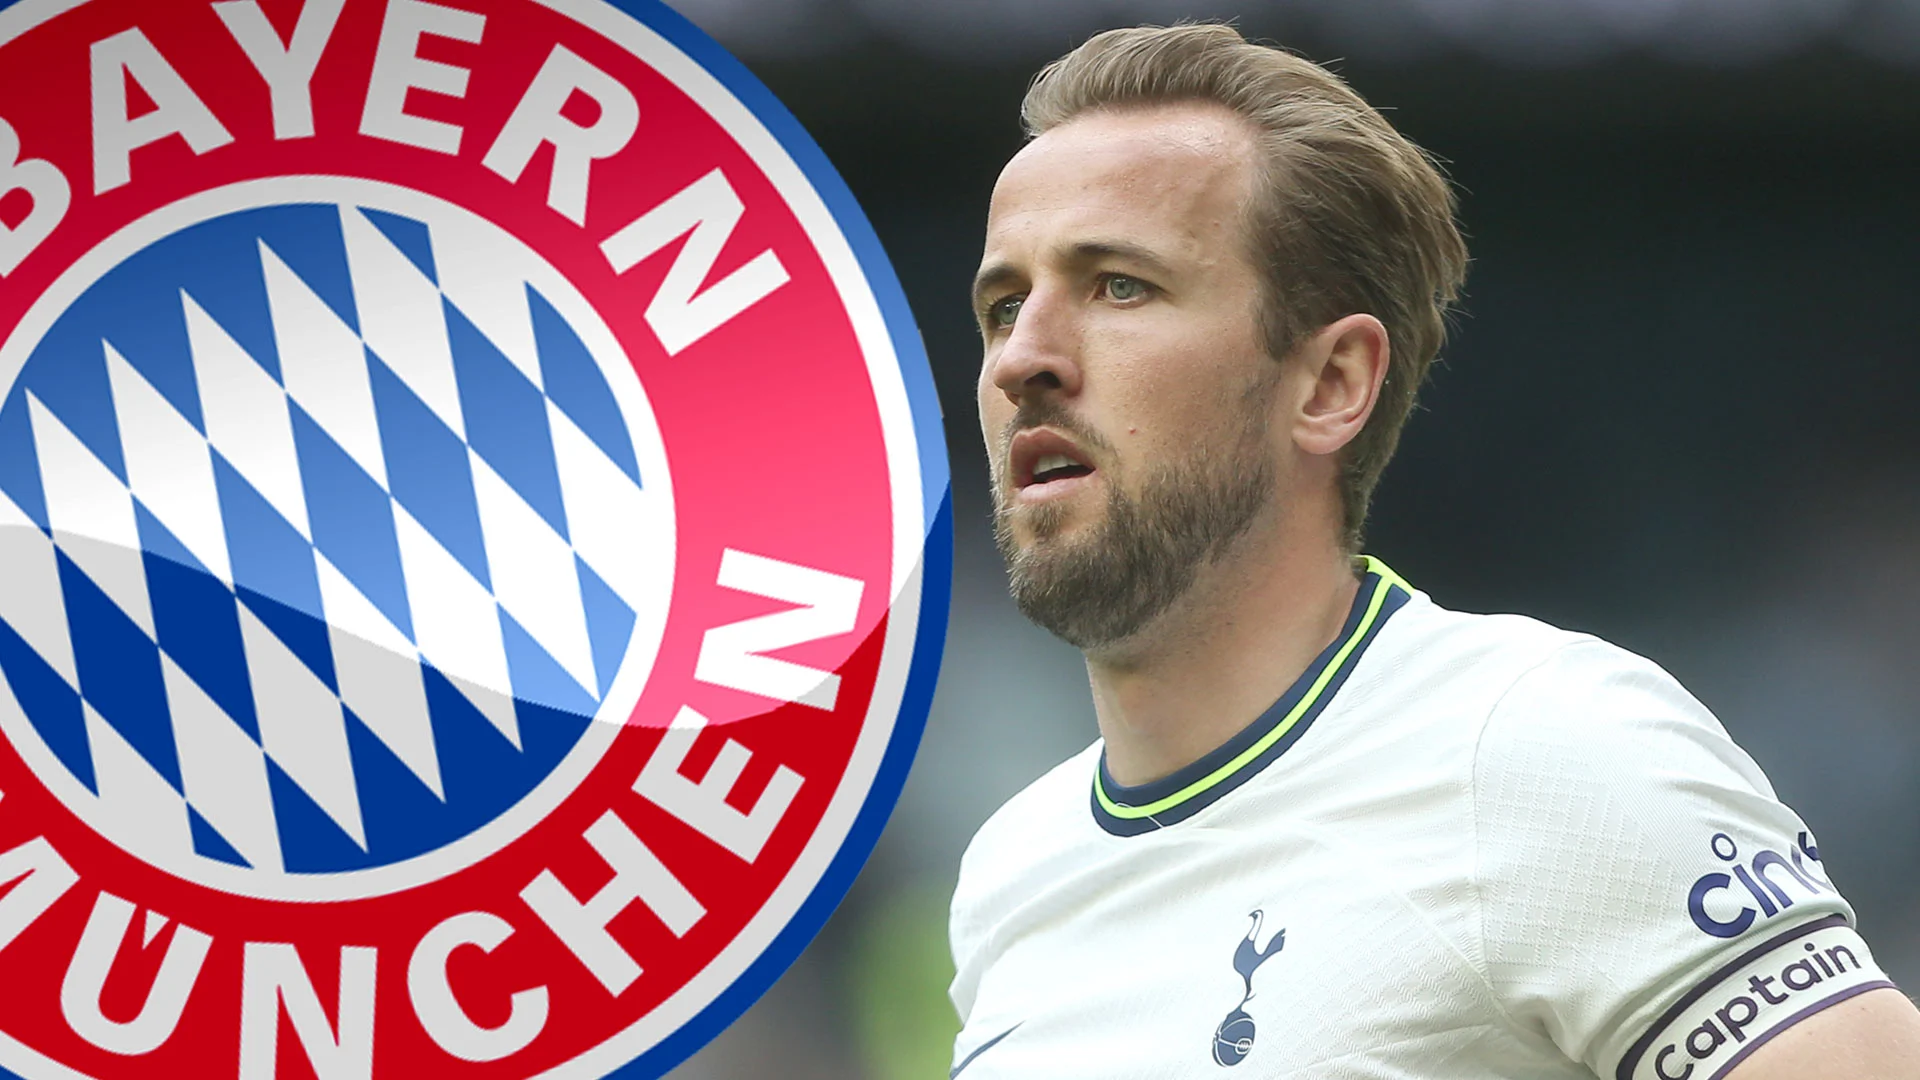 HARRY KANE made the entire senior leadership of BAYERN MUNICH do this, this is the first time